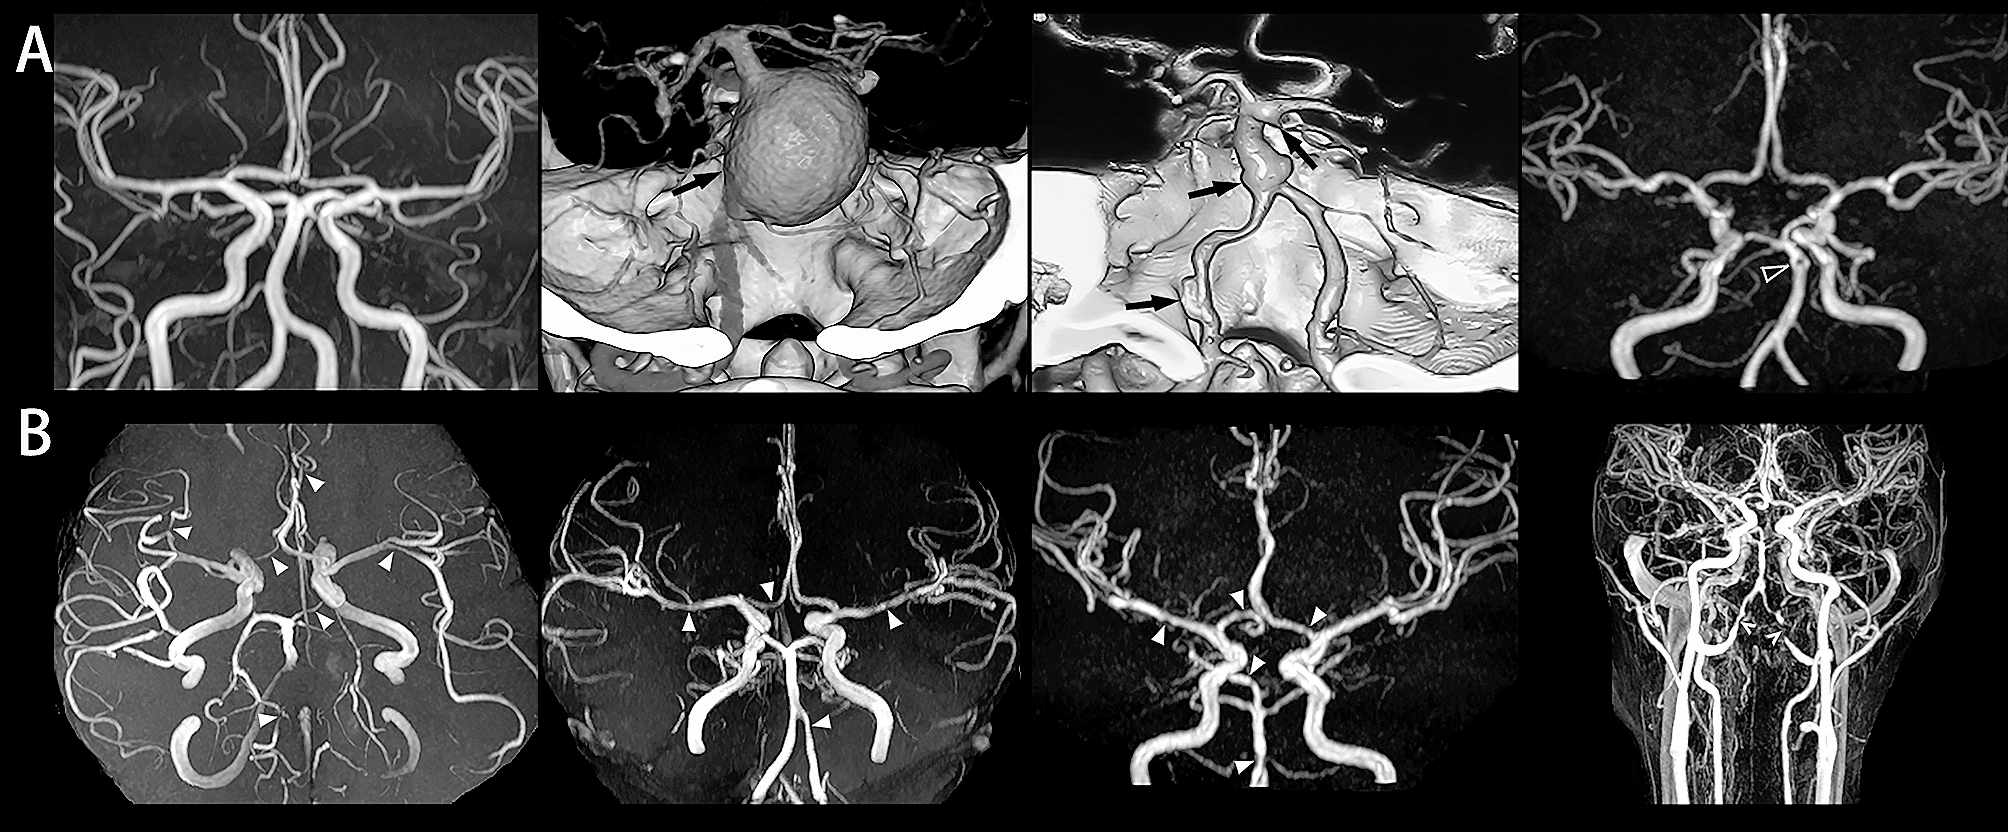 Intracranial vasculopathy: an important organ damage in young adult patients with late-onset Pompe disease